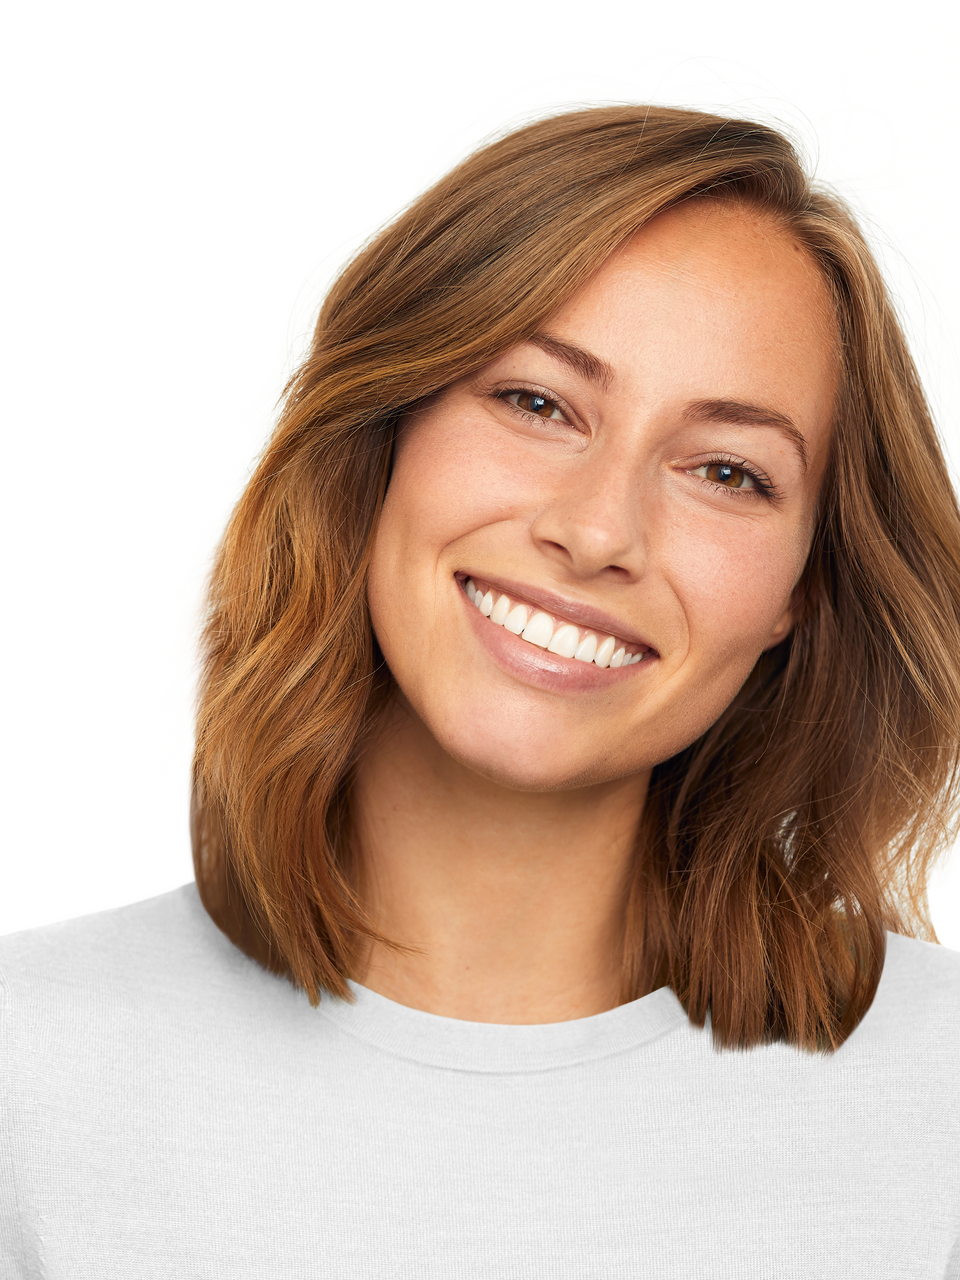 a woman with brown hair is smiling and wearing a white shirt .